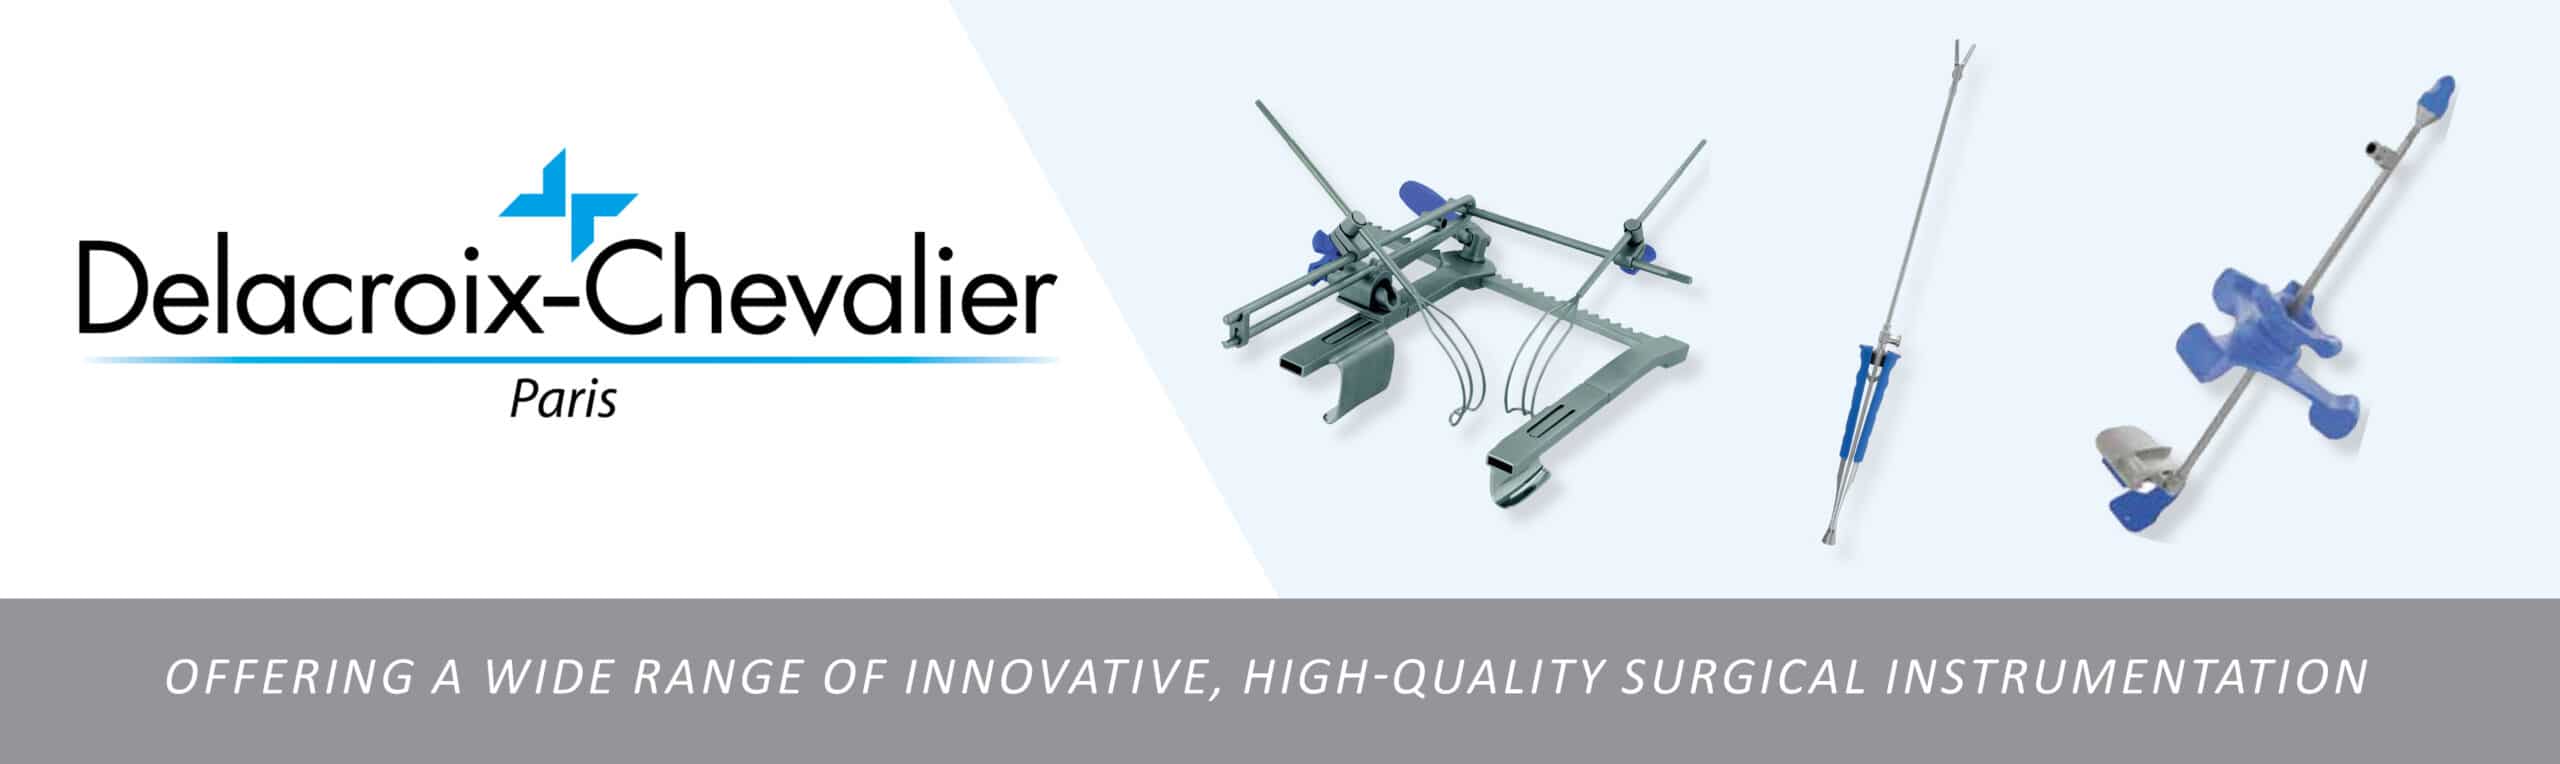 Offering a wide range of innovative, high-quality surgical instrumentation Delacroix-Chevalier